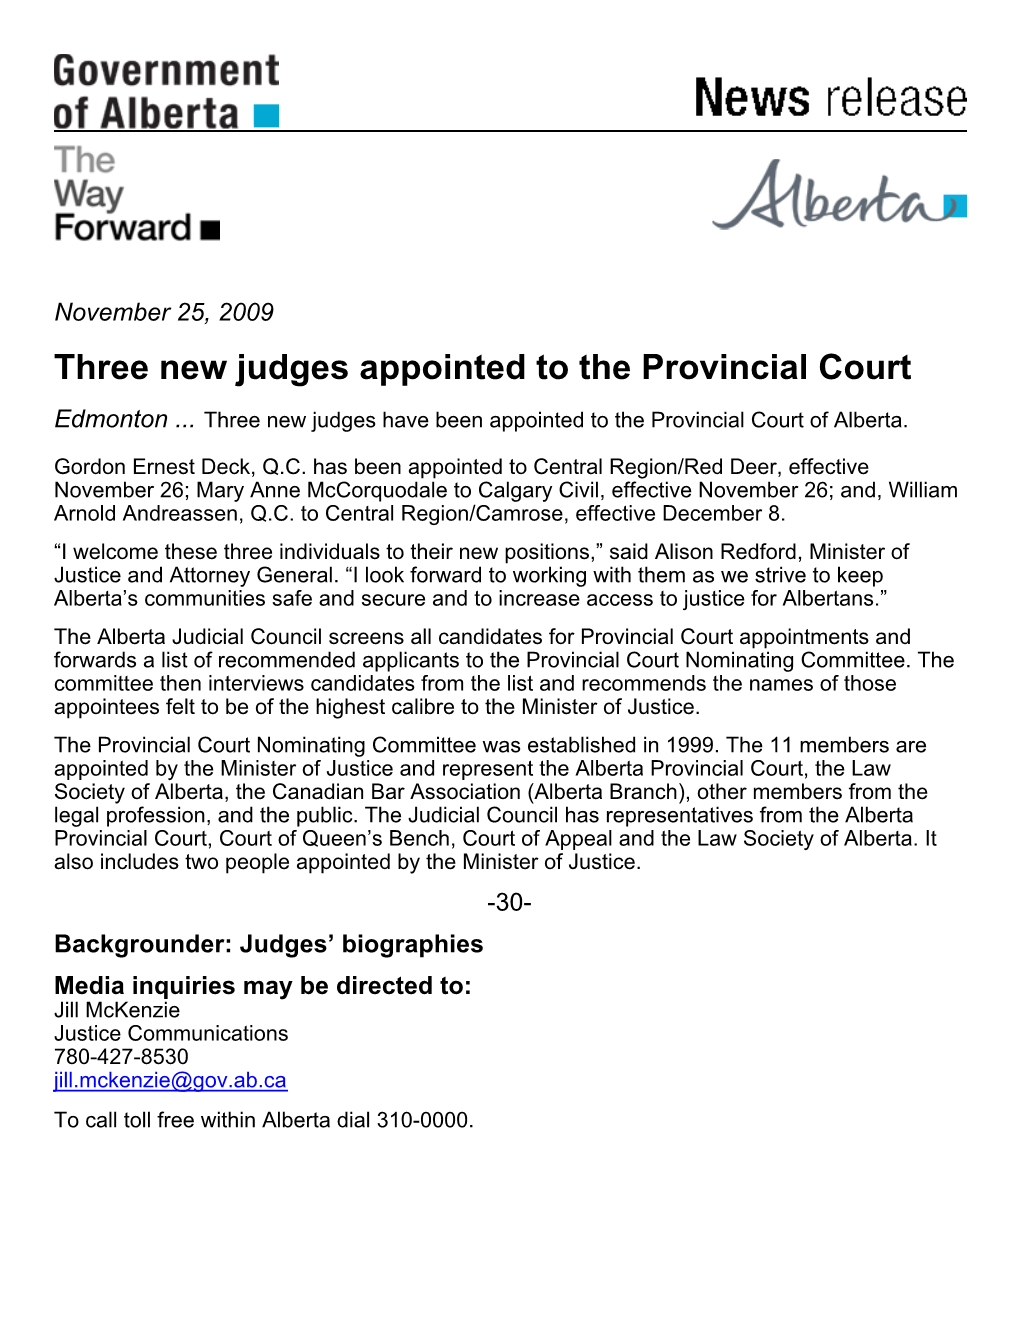 Three New Judges Appointed to the Provincial Court